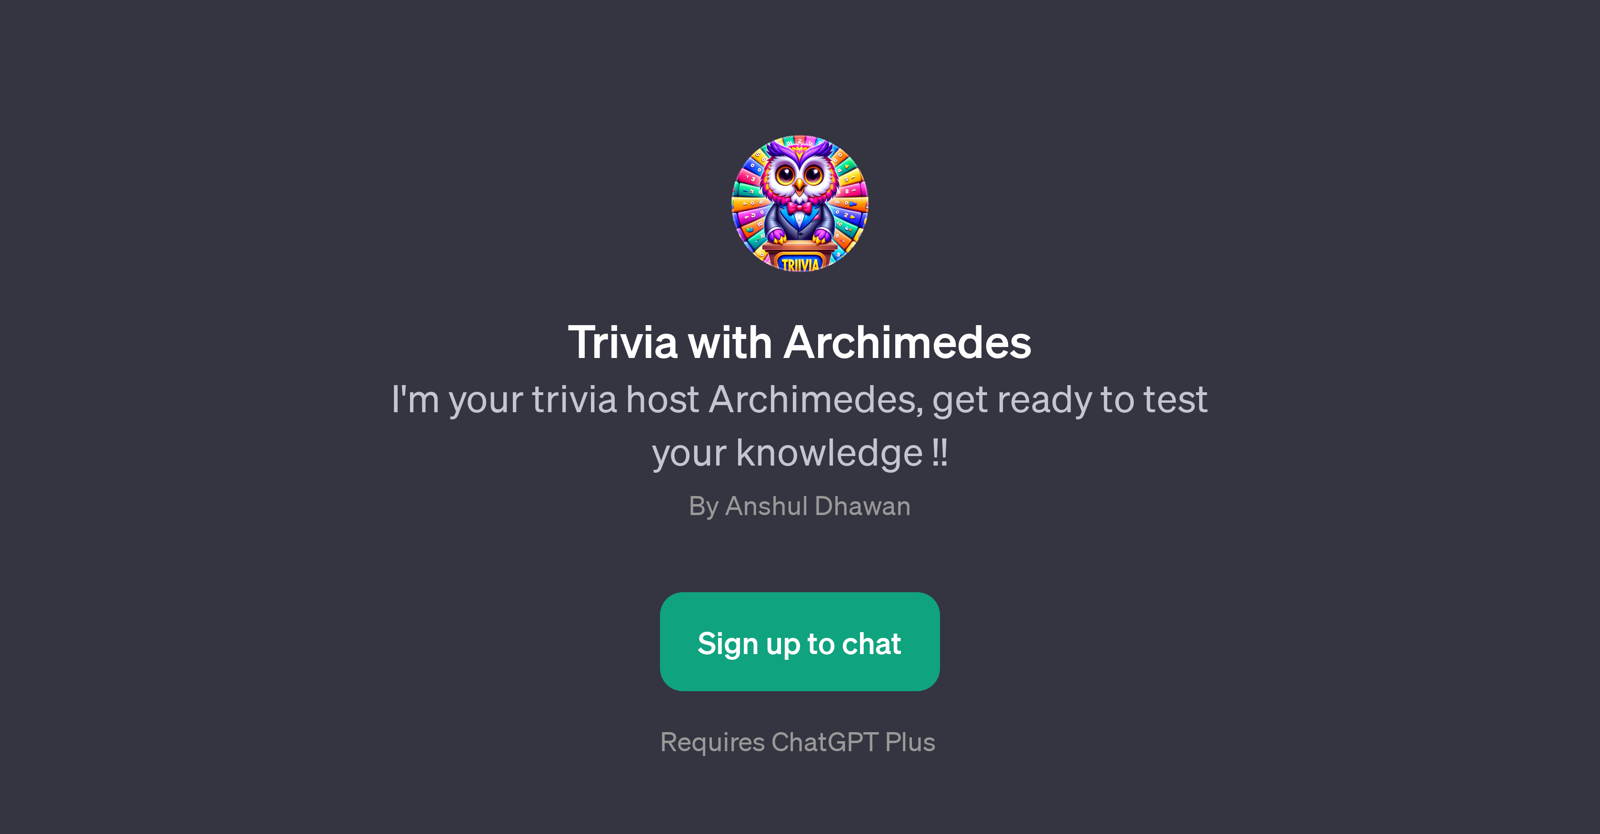 Trivia with Archimedes website